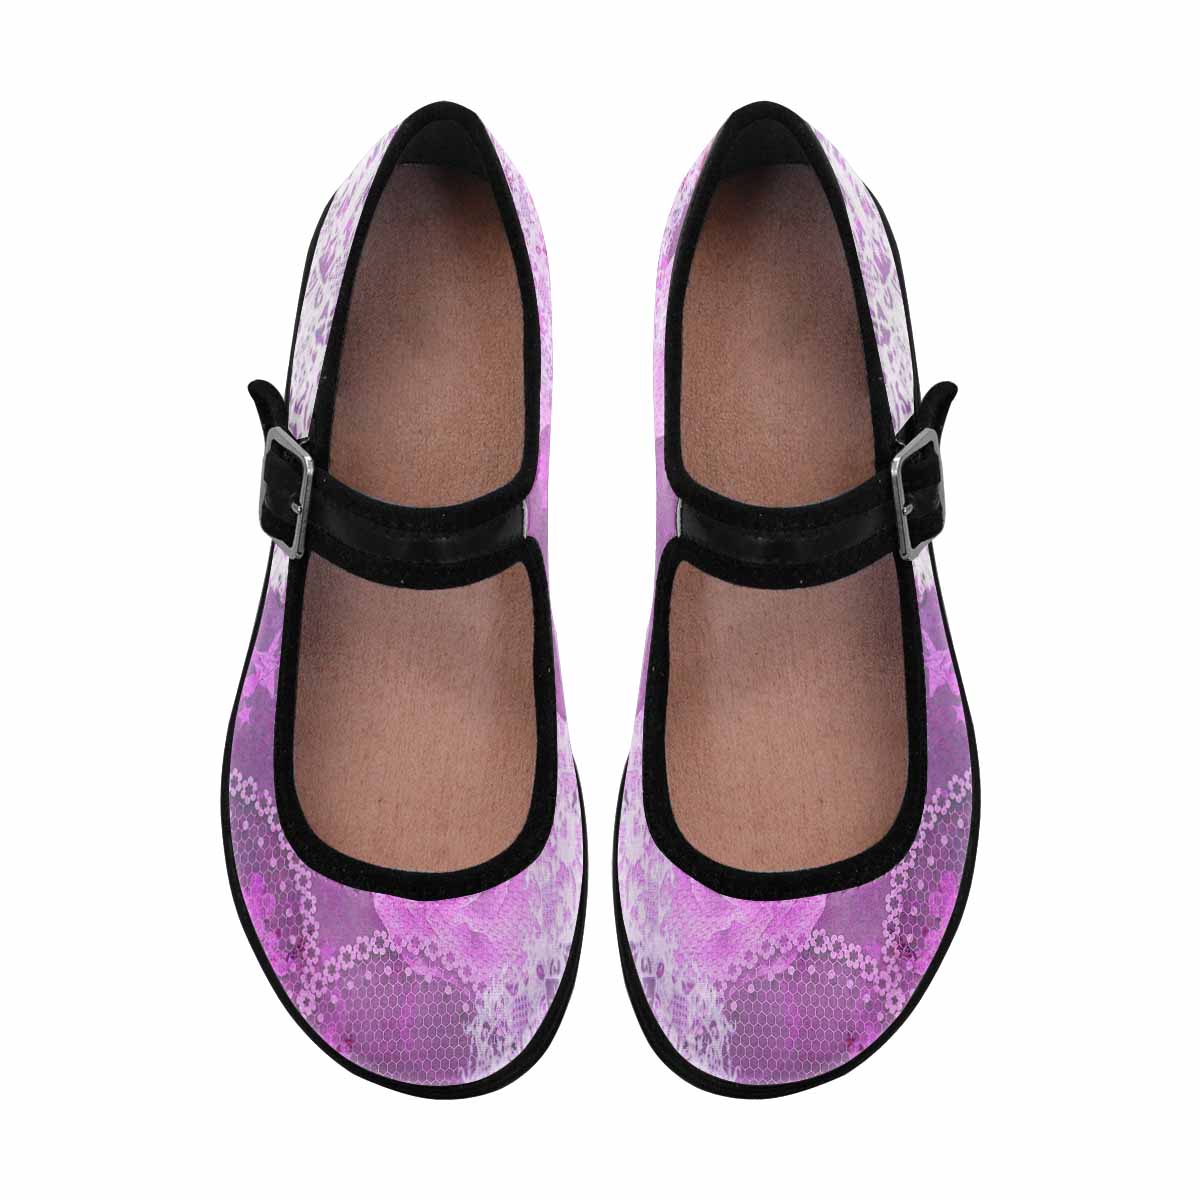 Victorian lace print, cute, vintage style women's Mary Jane shoes, design 03